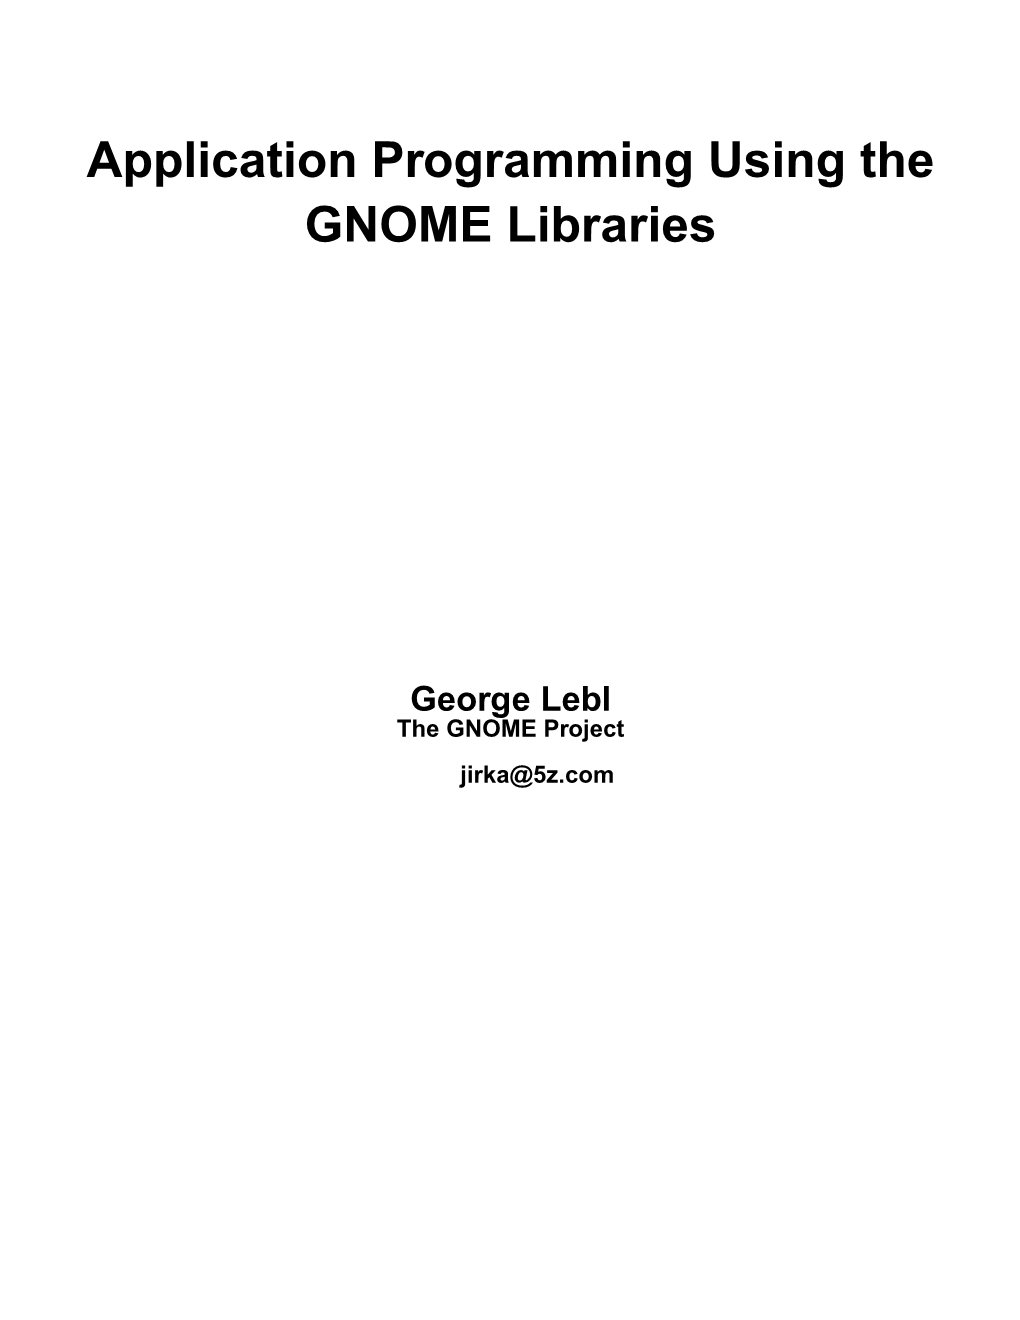 Application Programming Using the GNOME Libraries